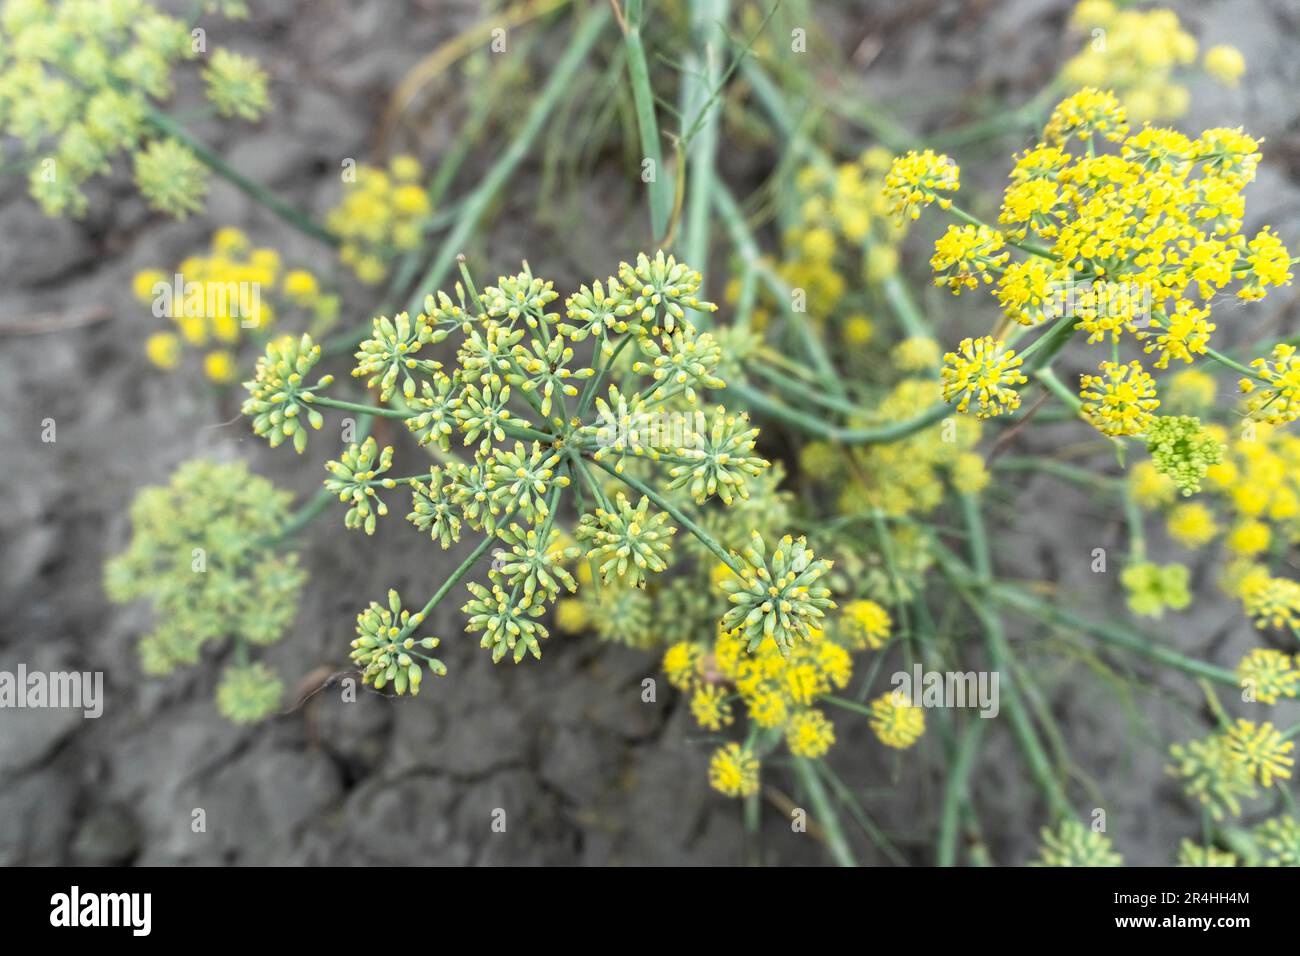 Blooming dill garden or smelly (Anethum graveolens). Annual herb, family Apiaceae. Growing fresh herbs. Green plants in the garden, ecological agricul Stock Photo